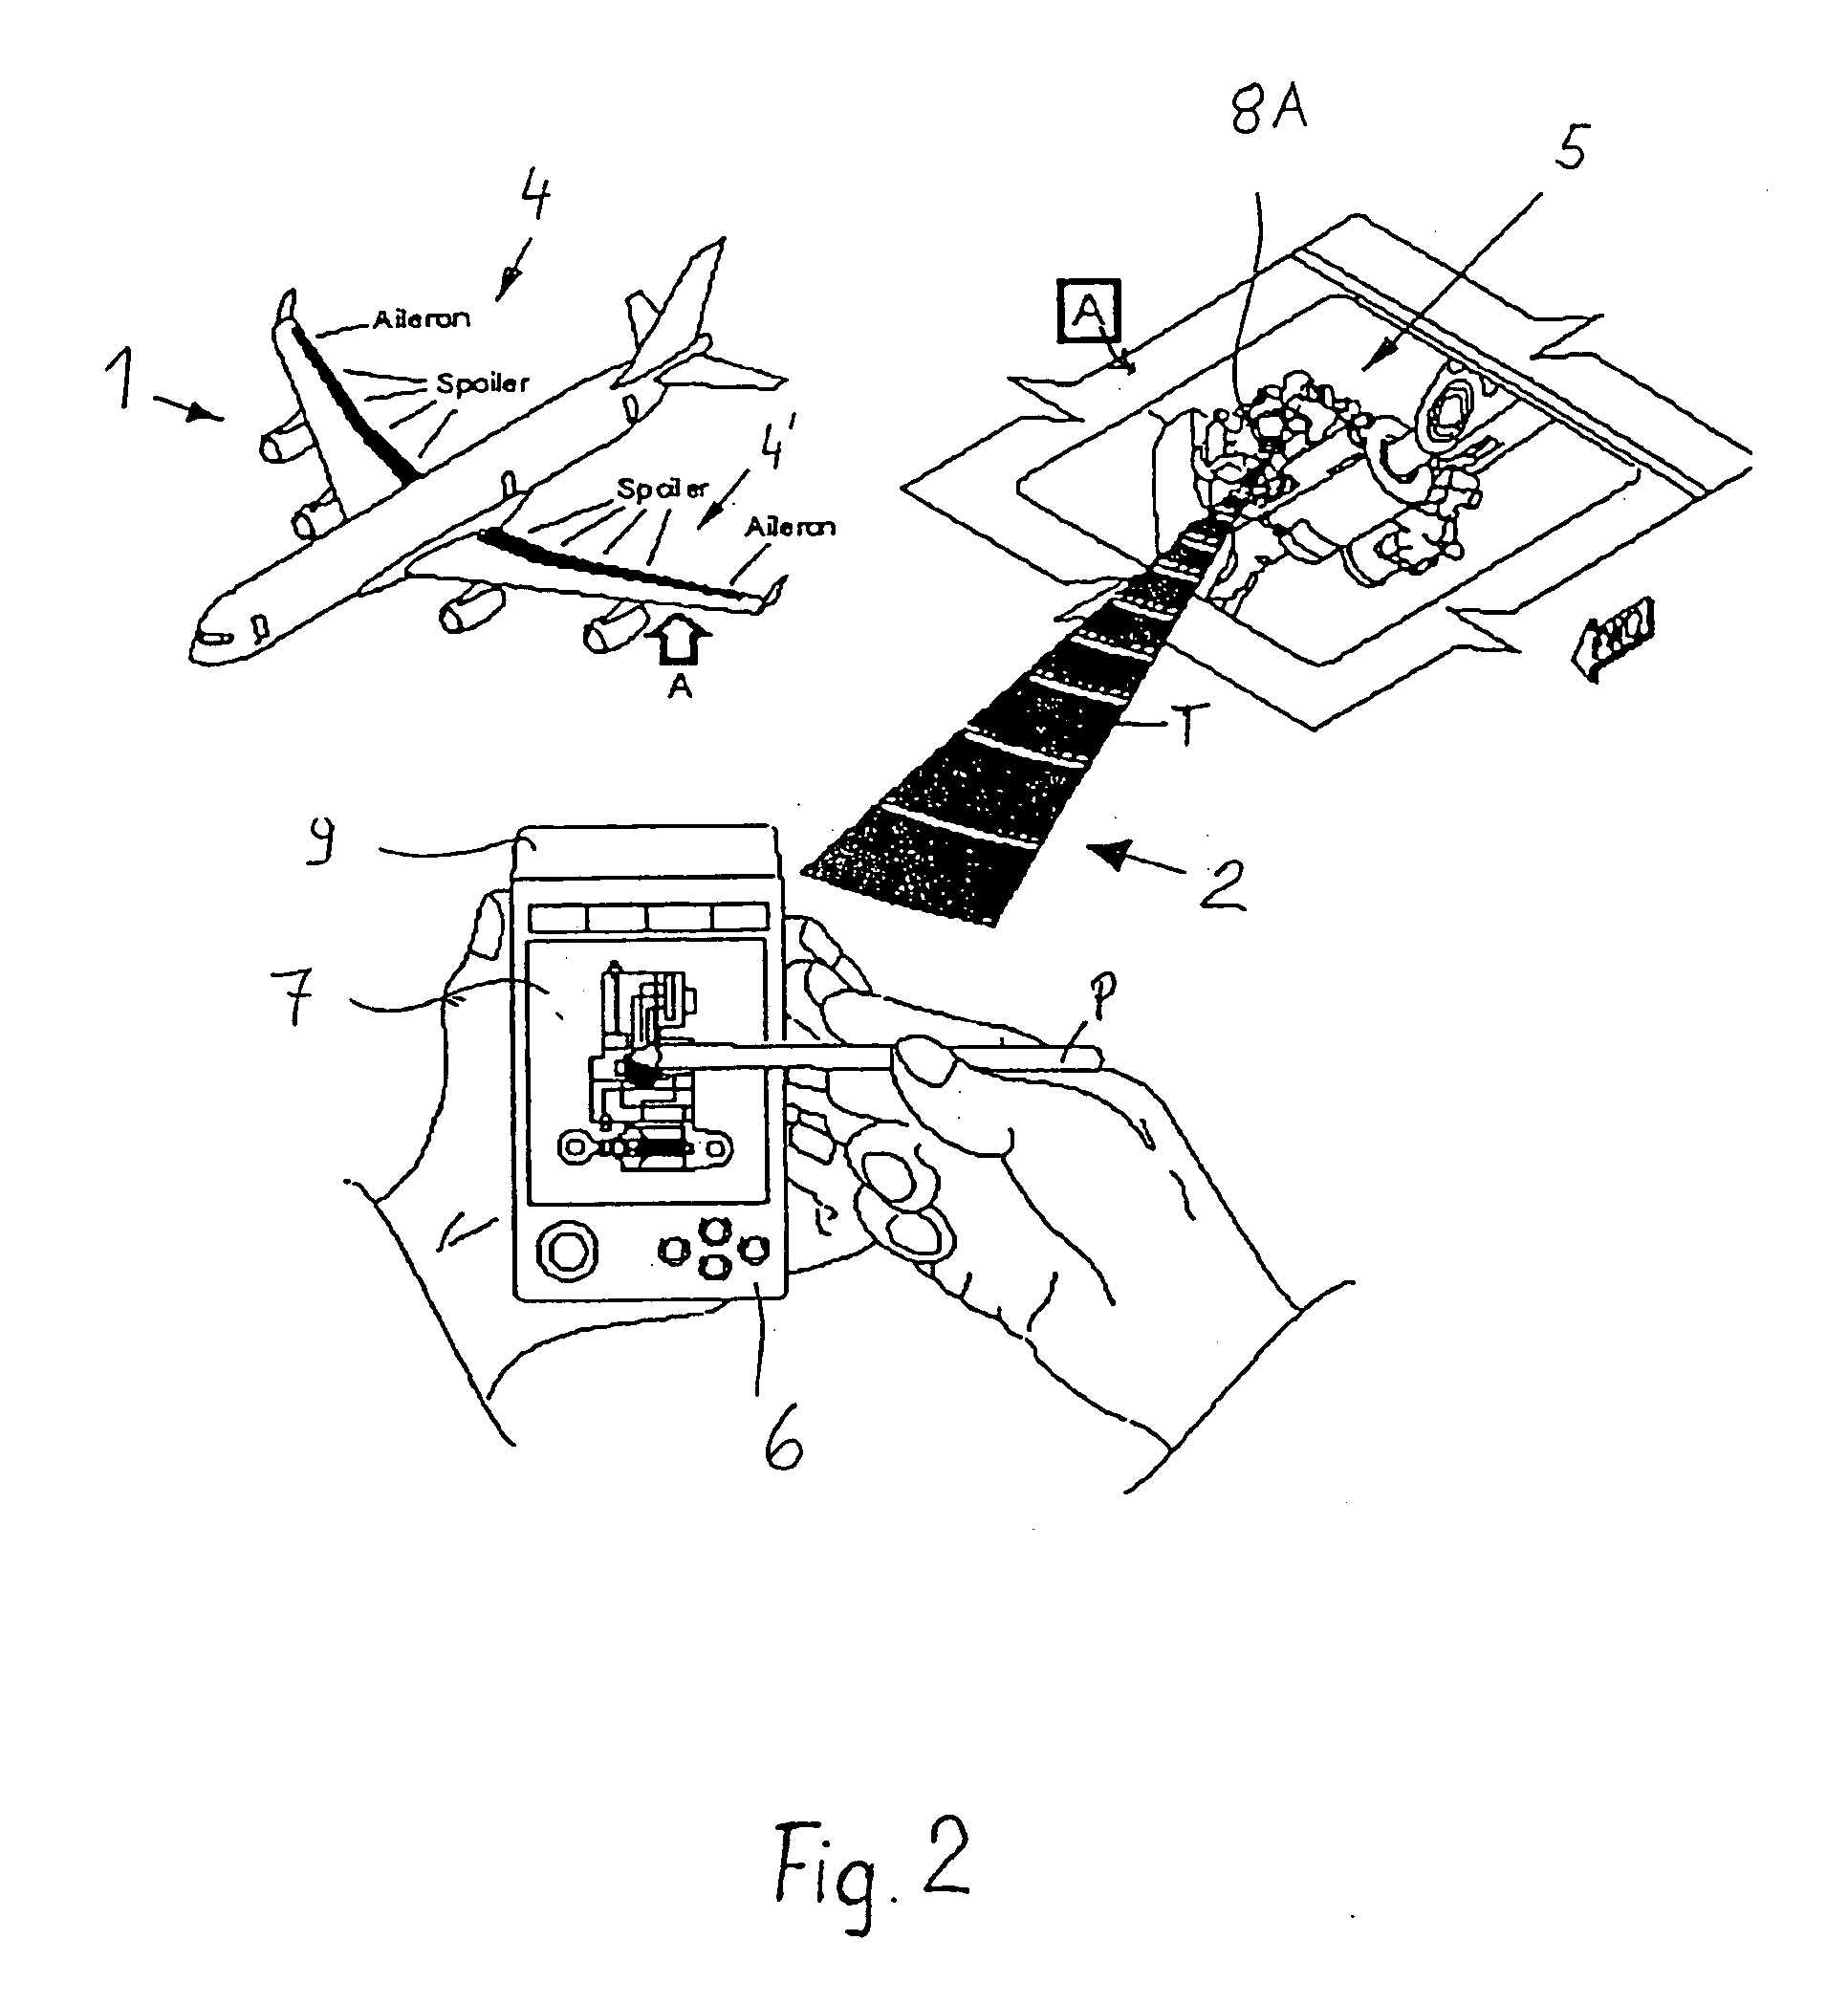 System and method for diagnosing aircraft components for maintenance purposes